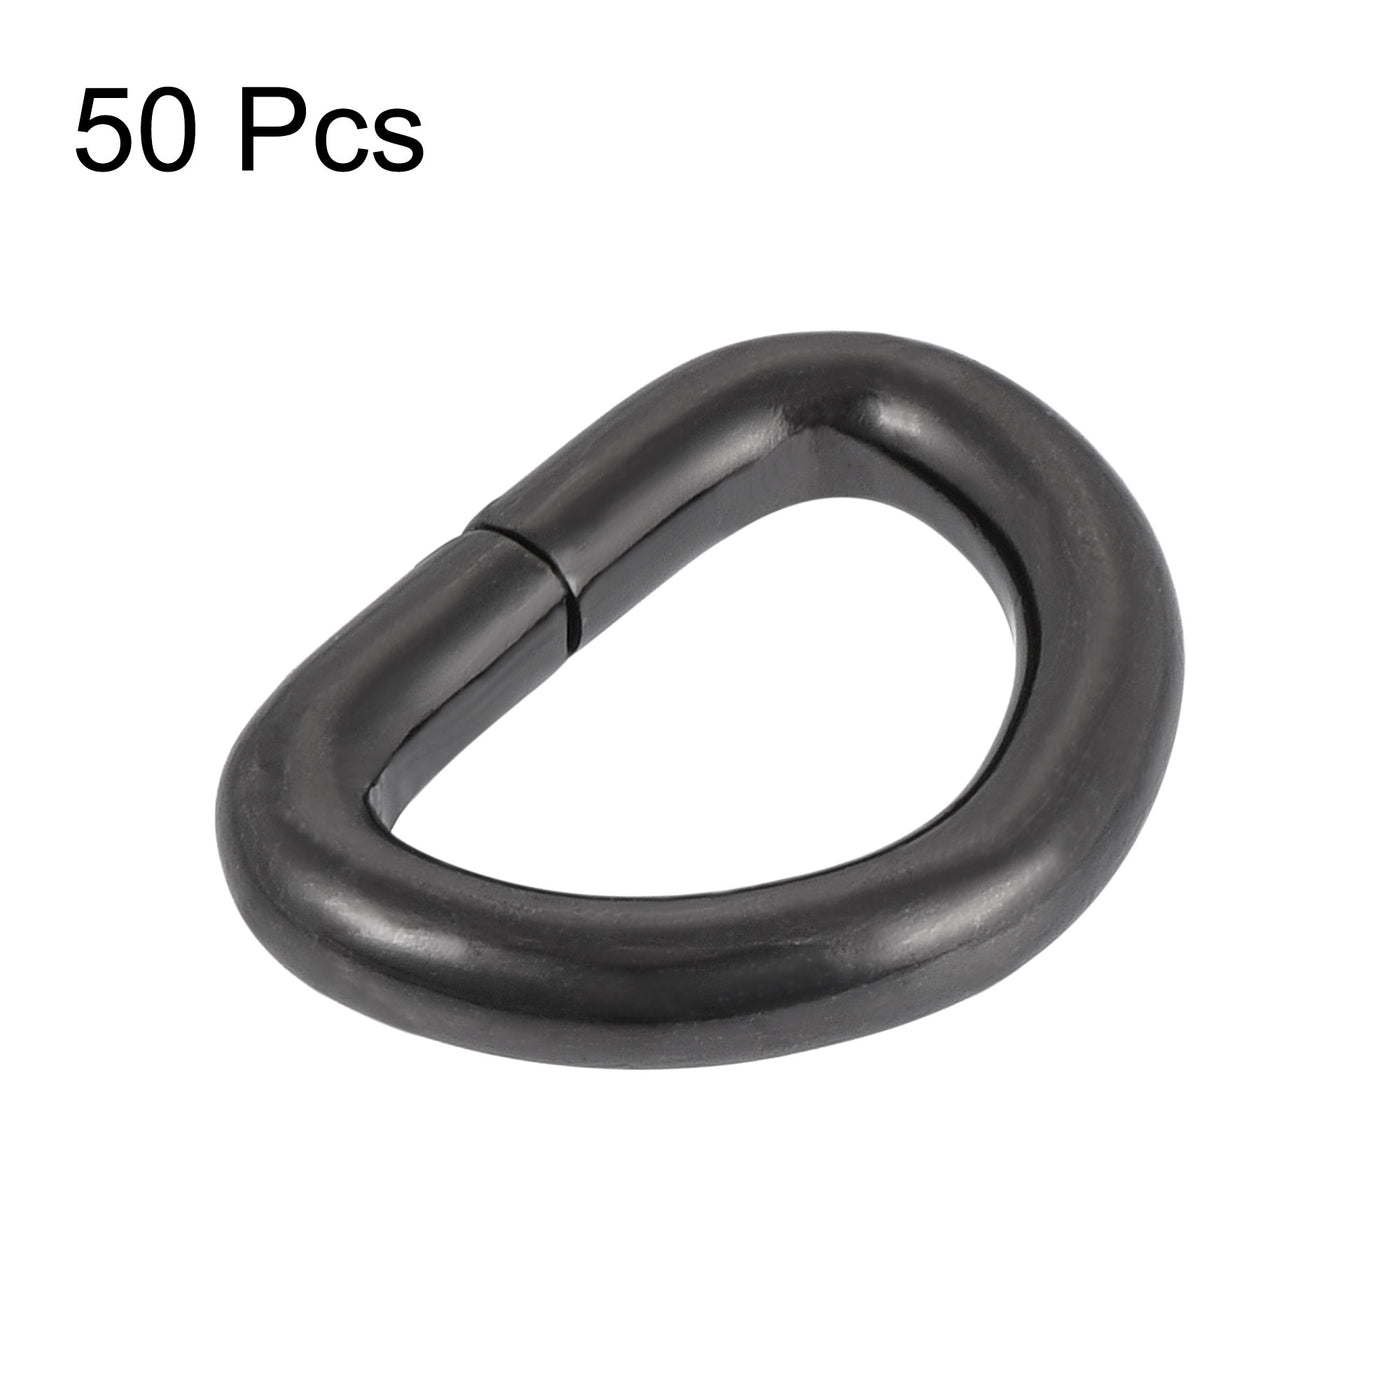 uxcell Uxcell Metal D Ring 0.63"(16mm) D-Rings Buckle for Hardware Bags Belts Craft DIY Accessories Black 50pcs